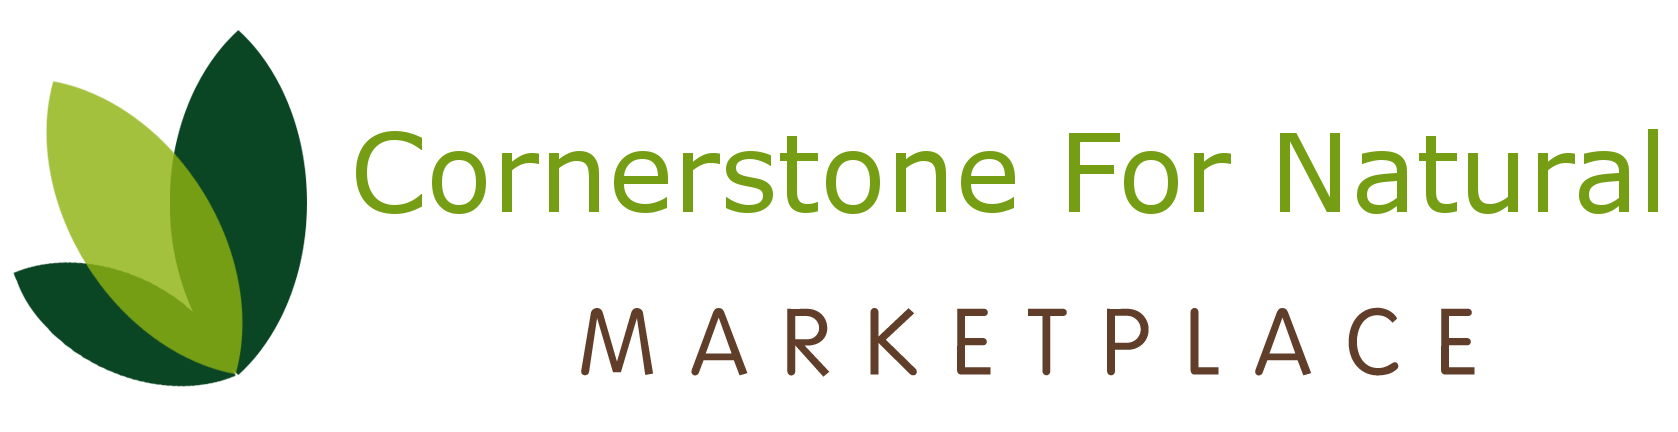 Cornerstone For Natural Marketplace